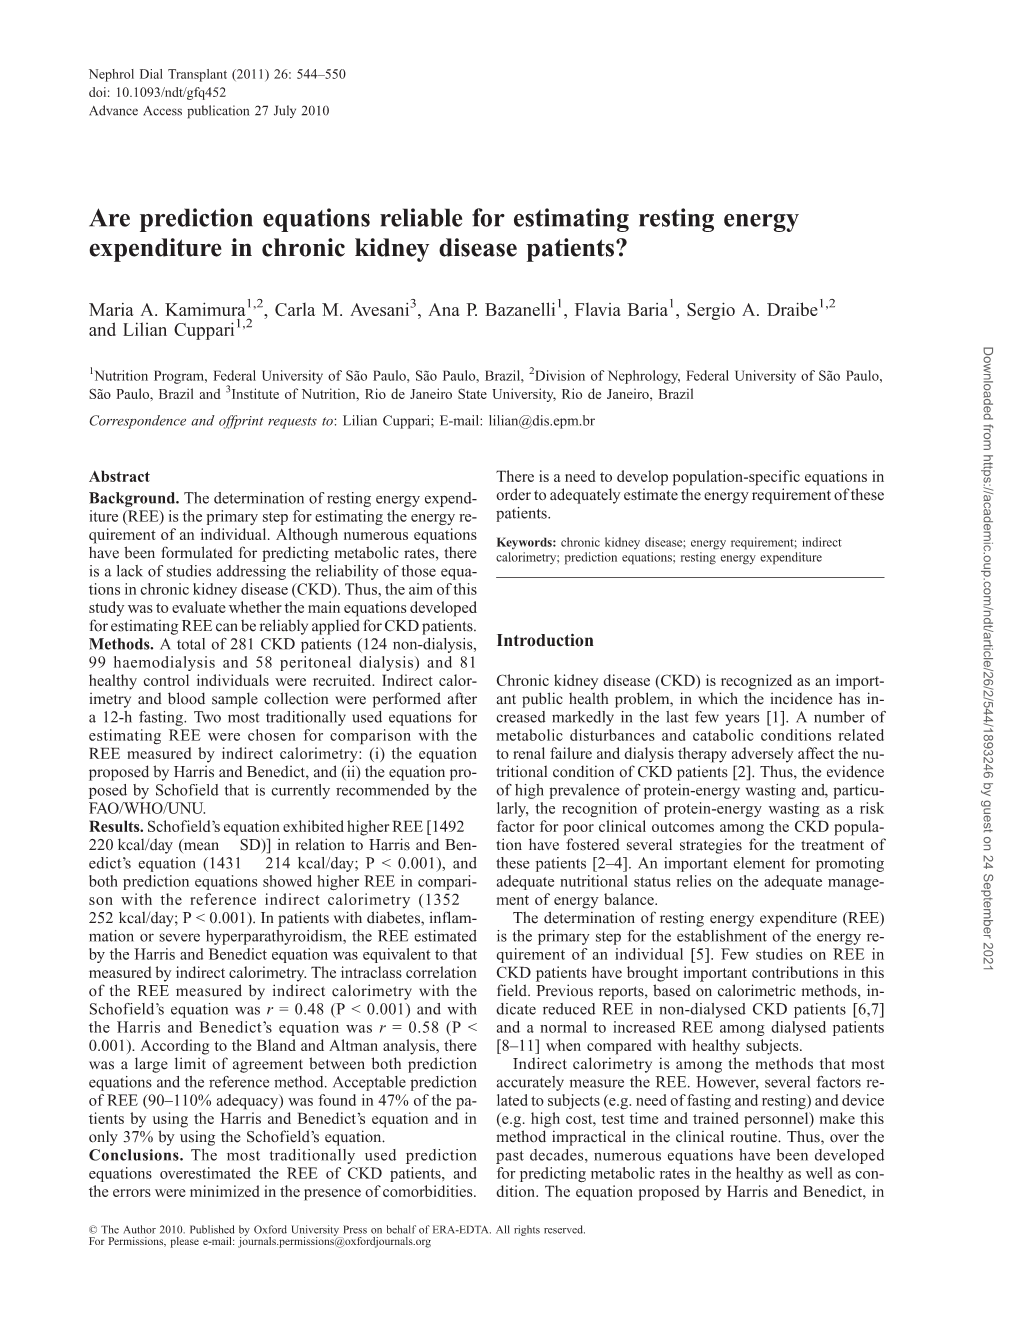 Are Prediction Equations Reliable for Estimating Resting Energy Expenditure in Chronic Kidney Disease Patients?